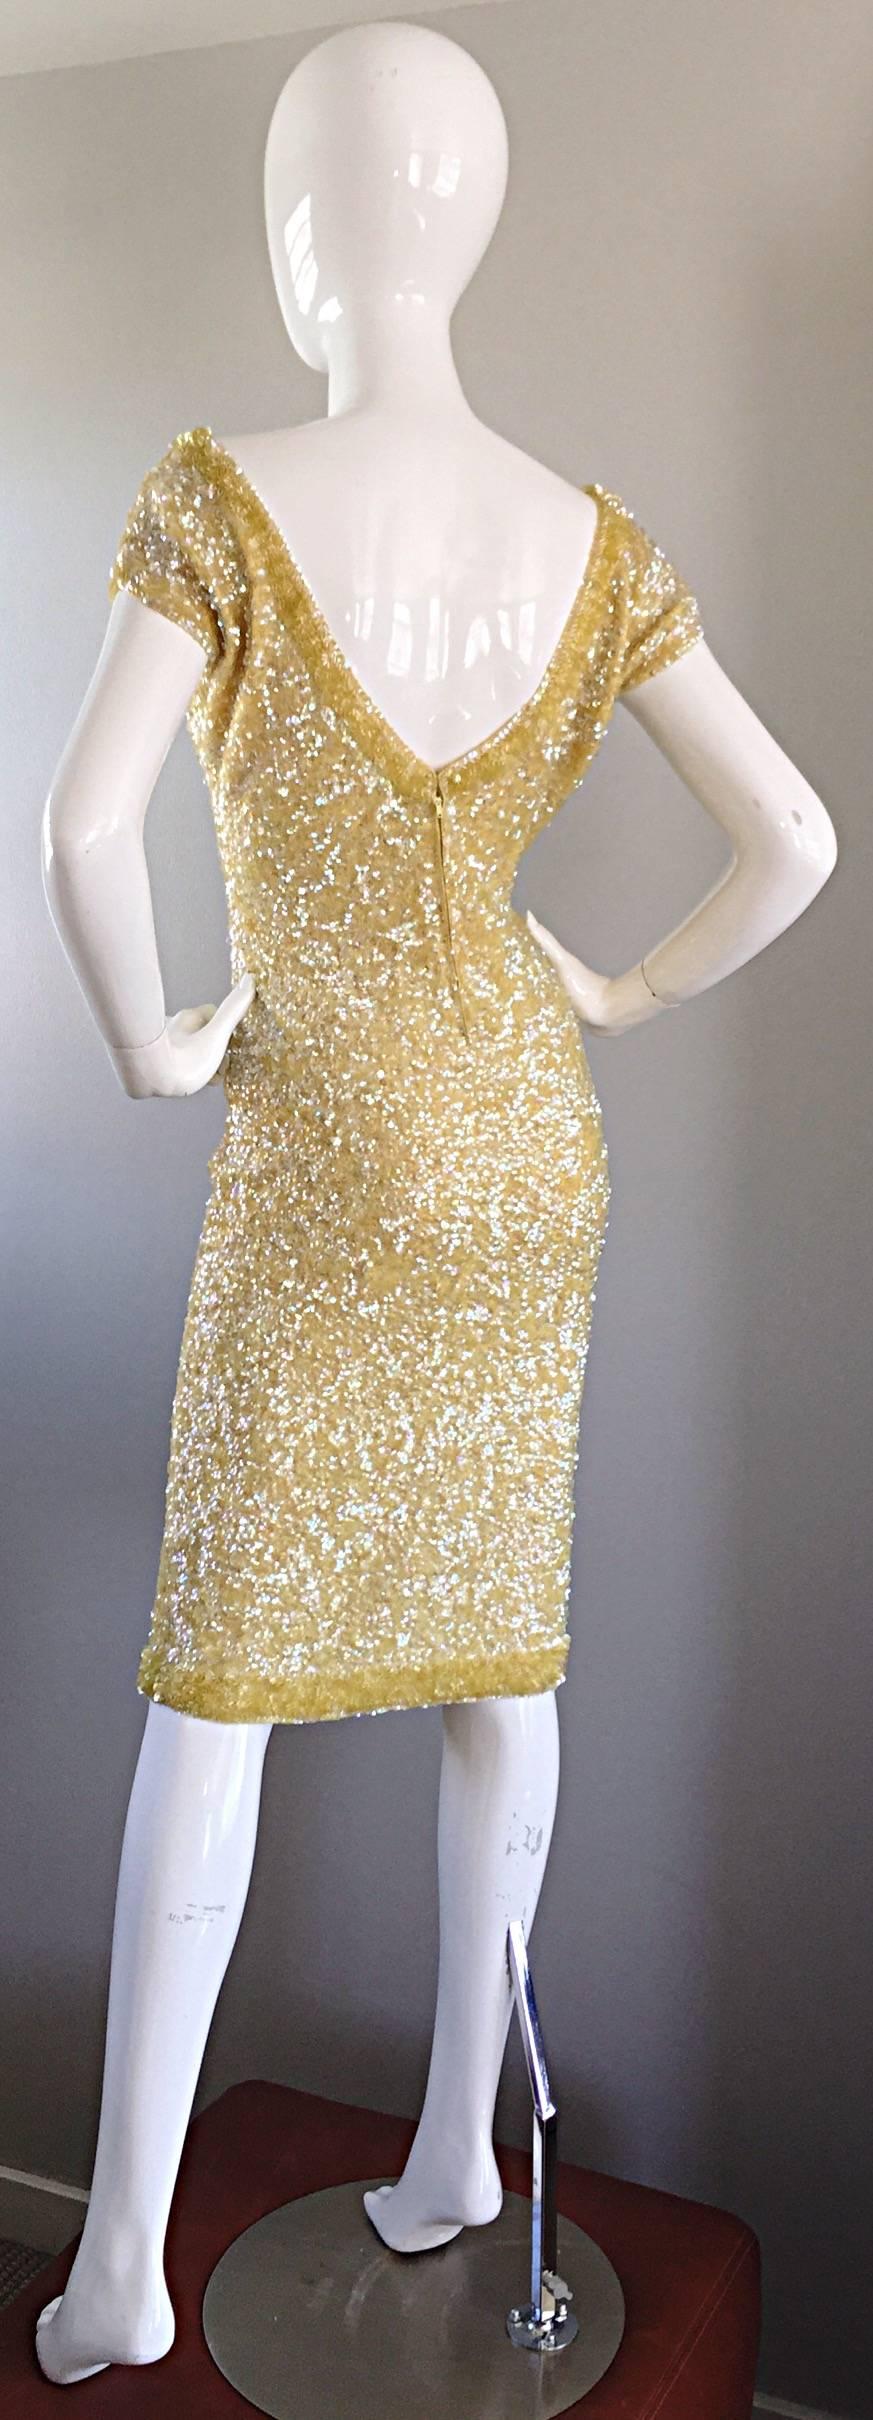 Beige 1950s Gene Shelly's Pale Yellow Fully Sequined 50s Vintage Wool Wiggle Dress